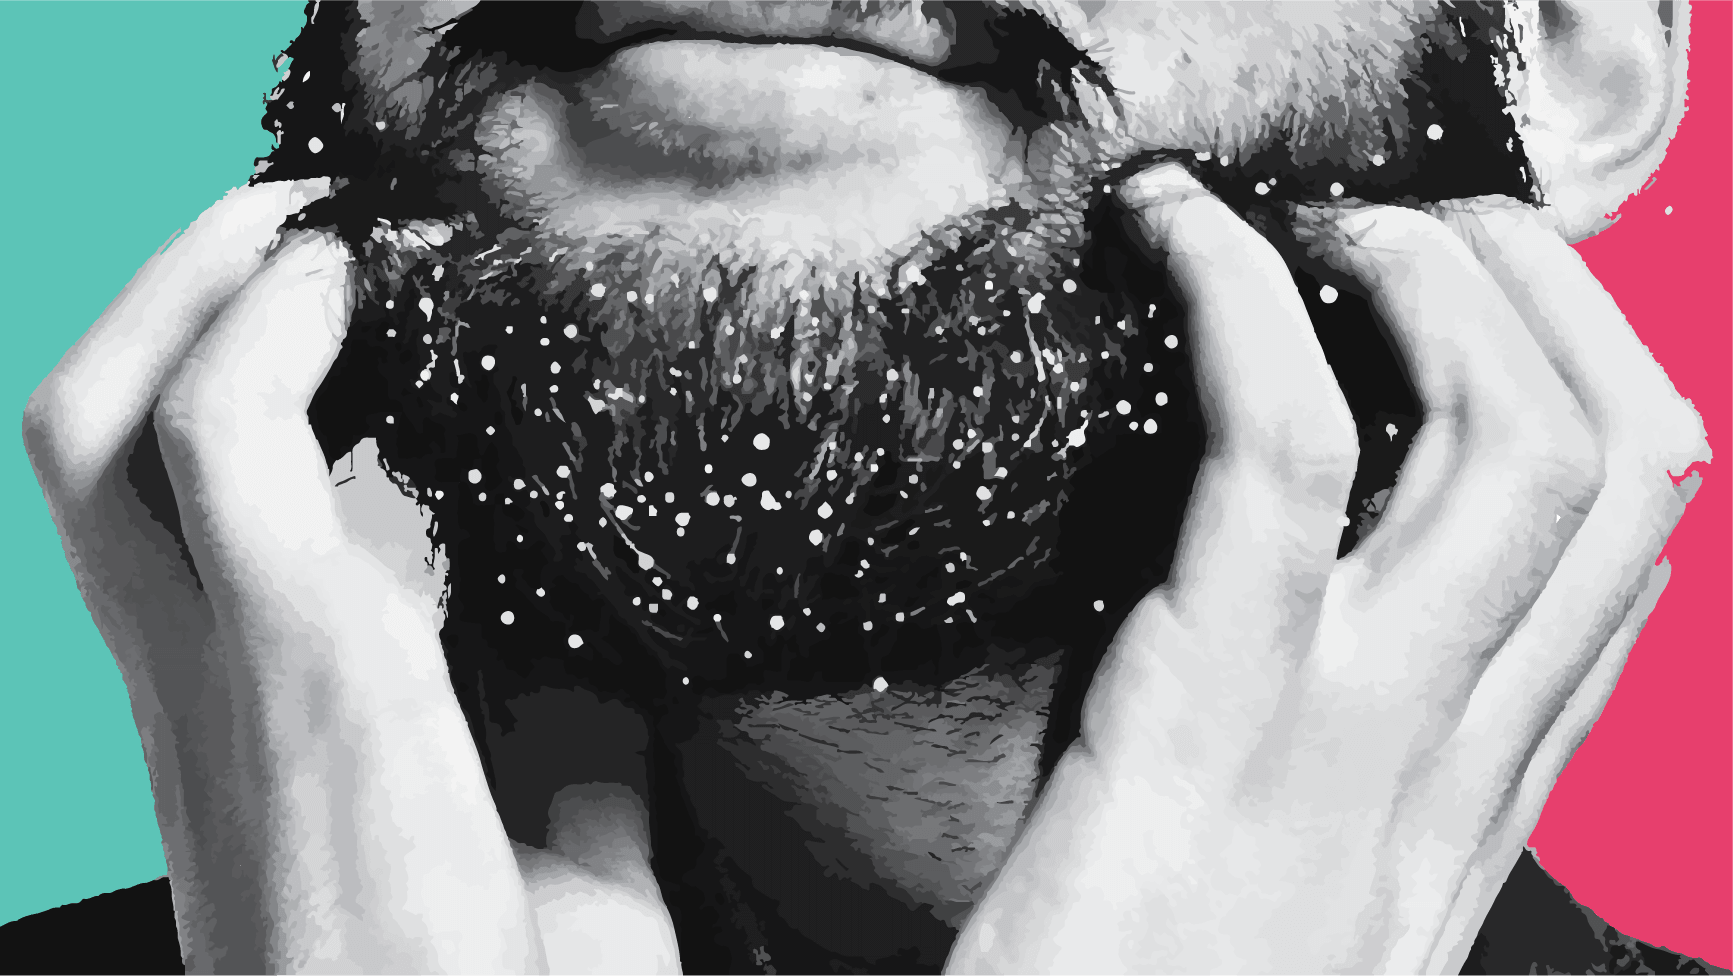 Beard Dandruff 101: What Causes It and How Can You Treat It? - South Beach Beard